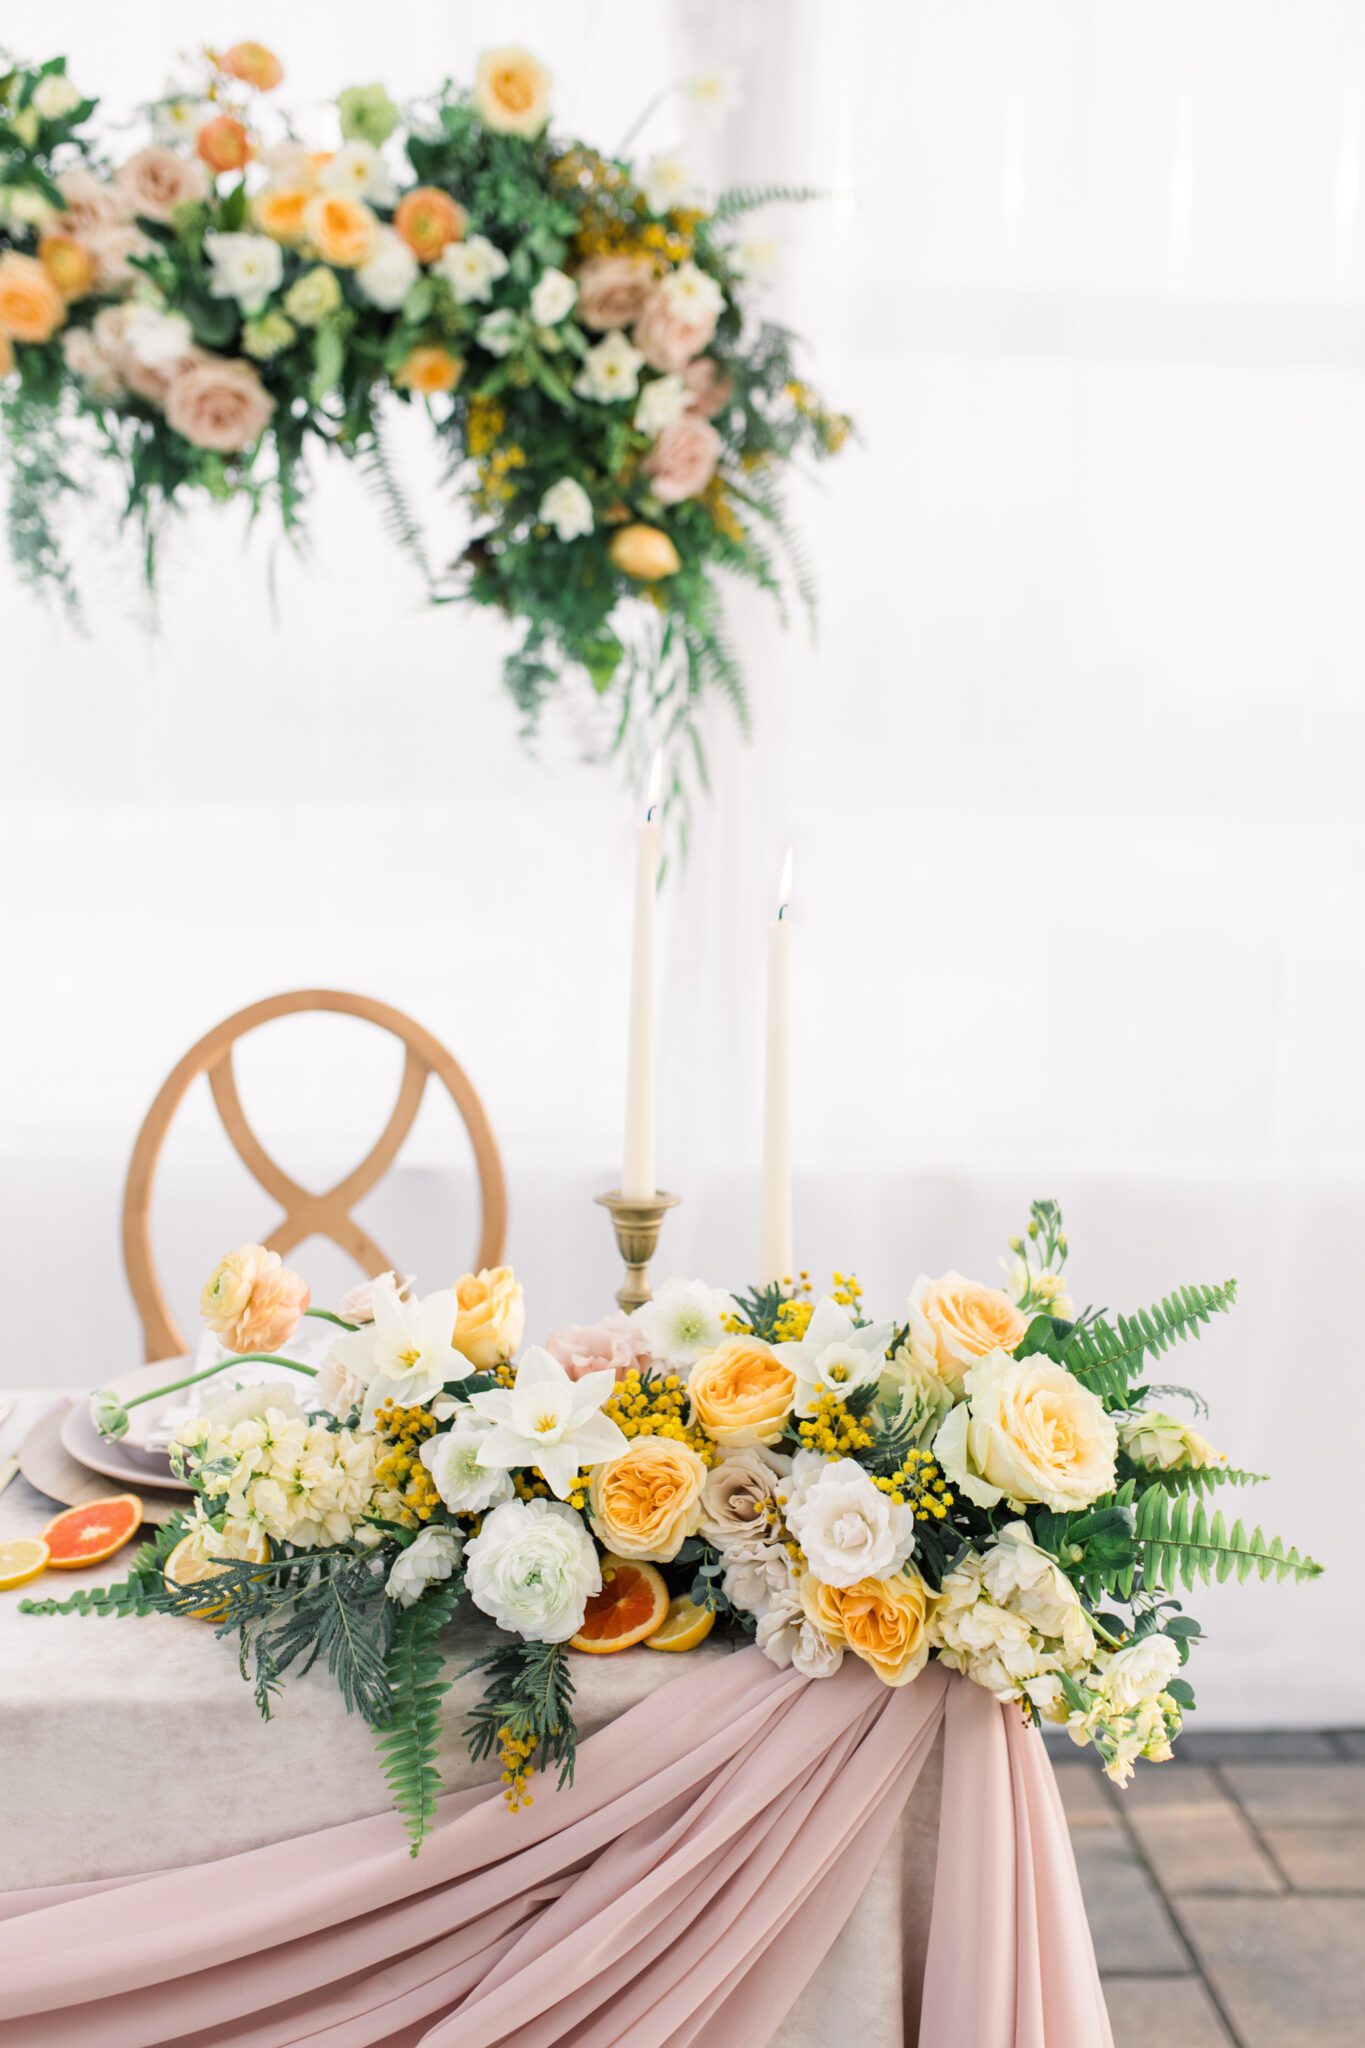 Yellow and peach wedding florals designed by Little Petal Company, summer wedding inspiration, summer wedding ideas, sweetheart table inspiration